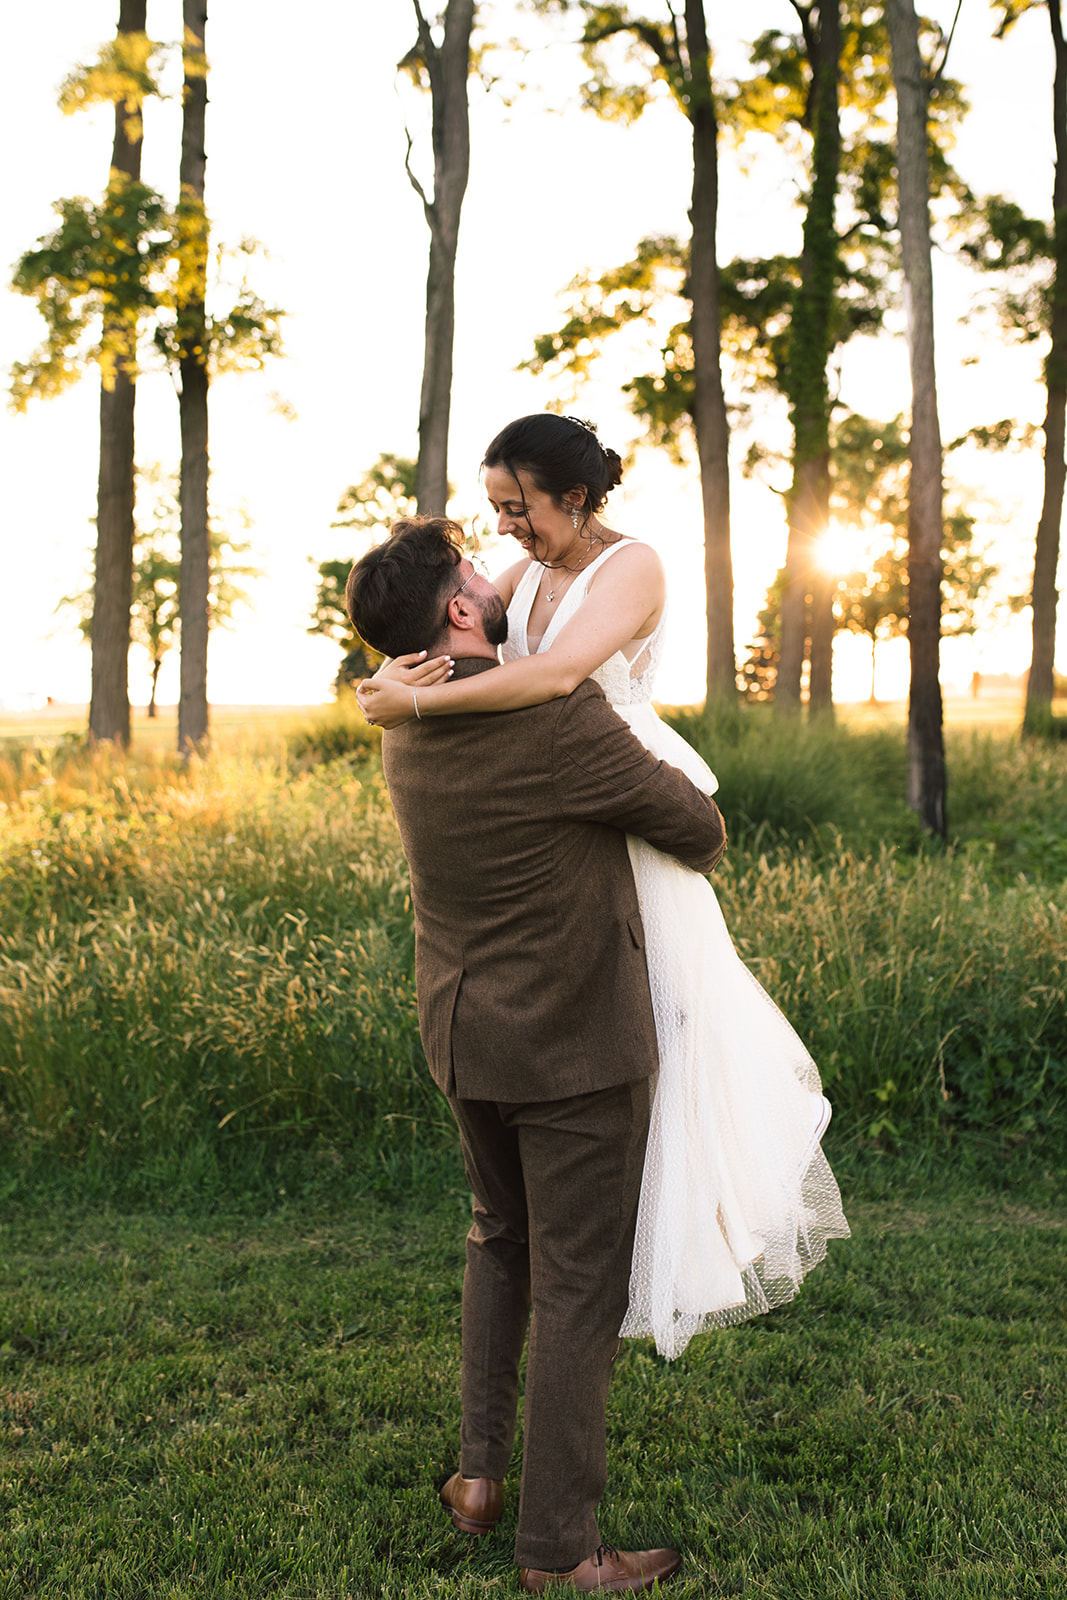 Whimsical couples wedding in a warm pasture in northeast ohio